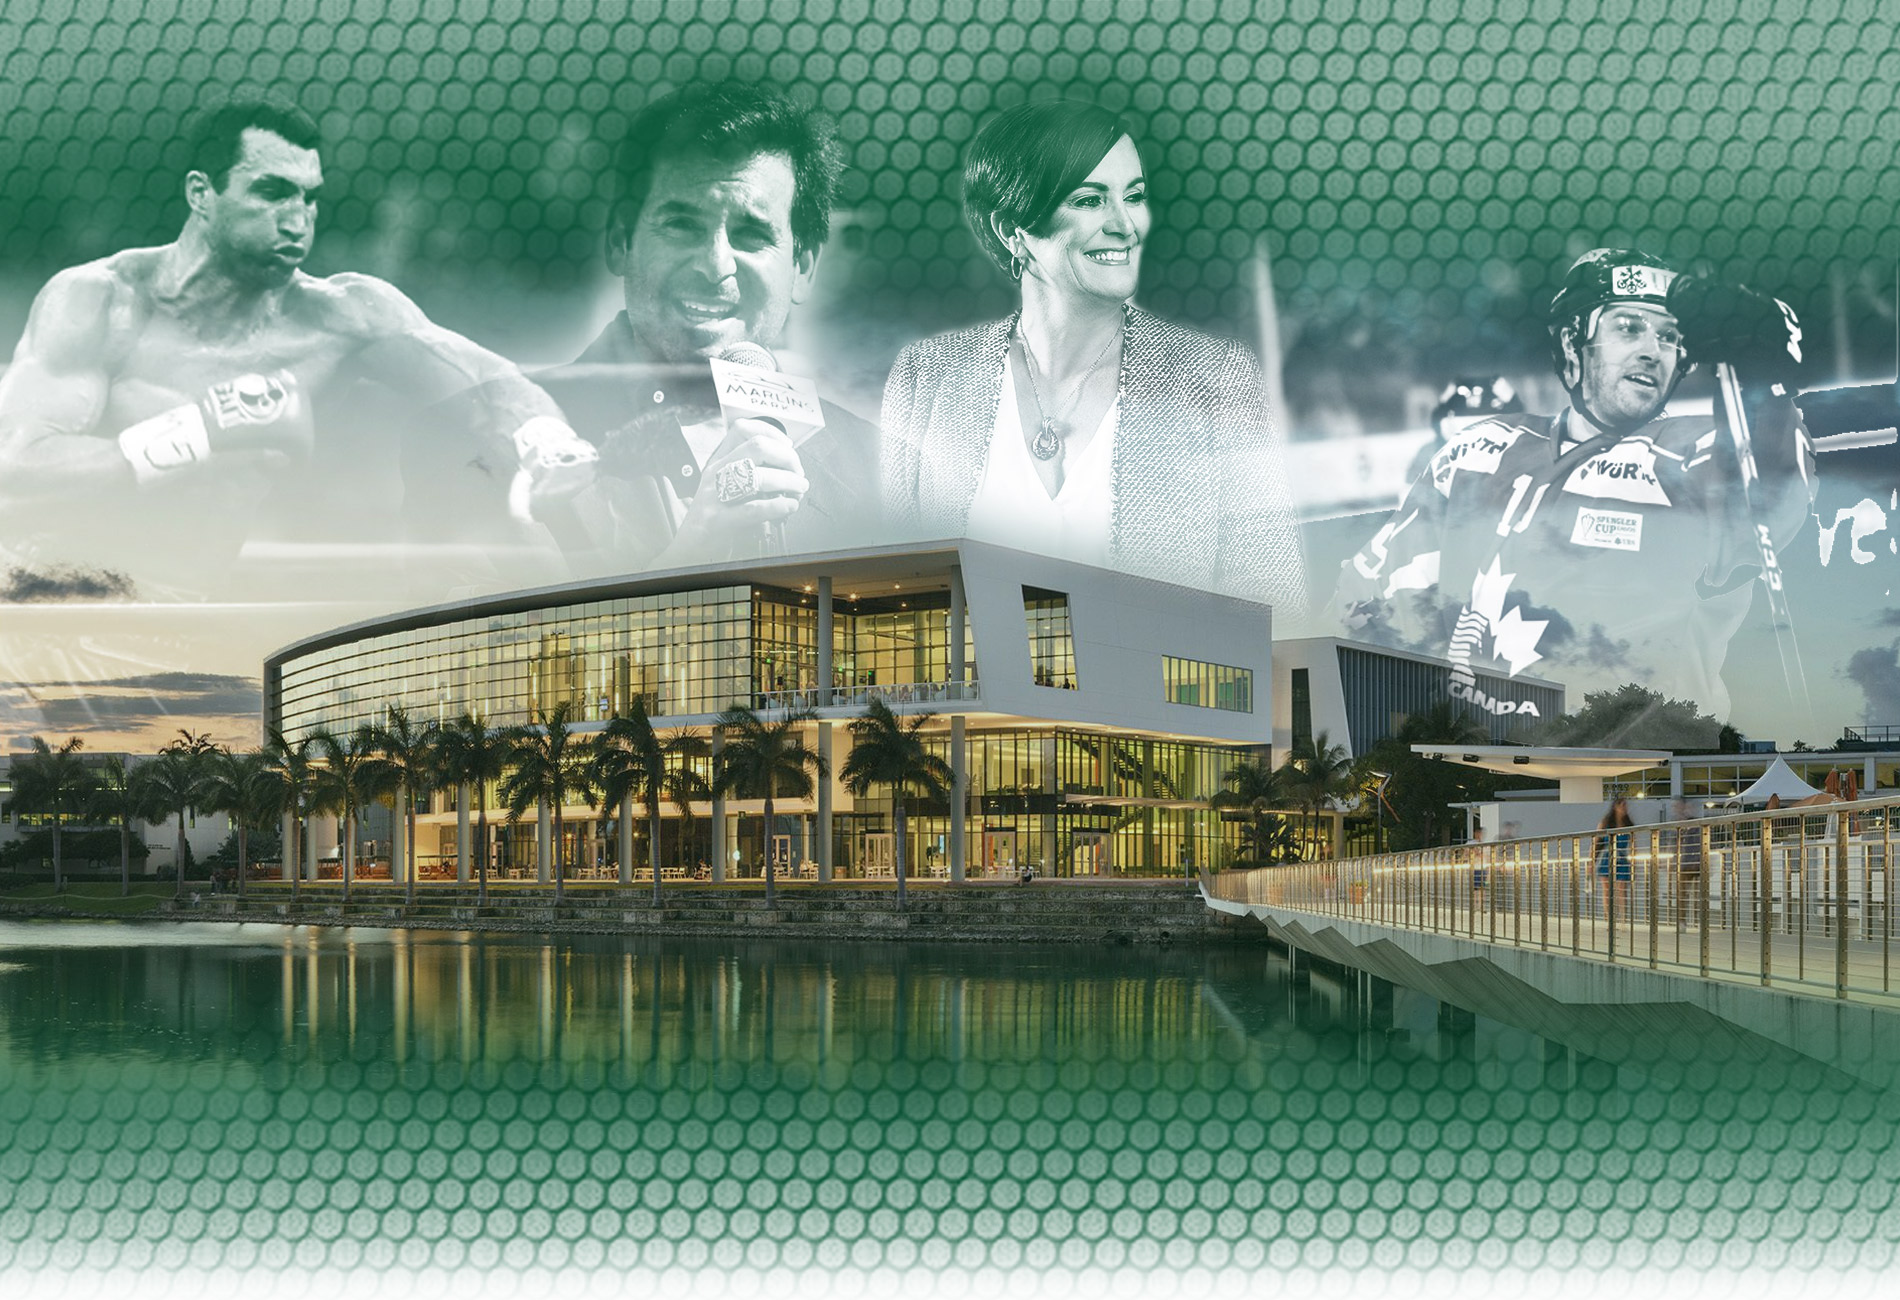 Shalala Center with Podcast Guests Superimposed